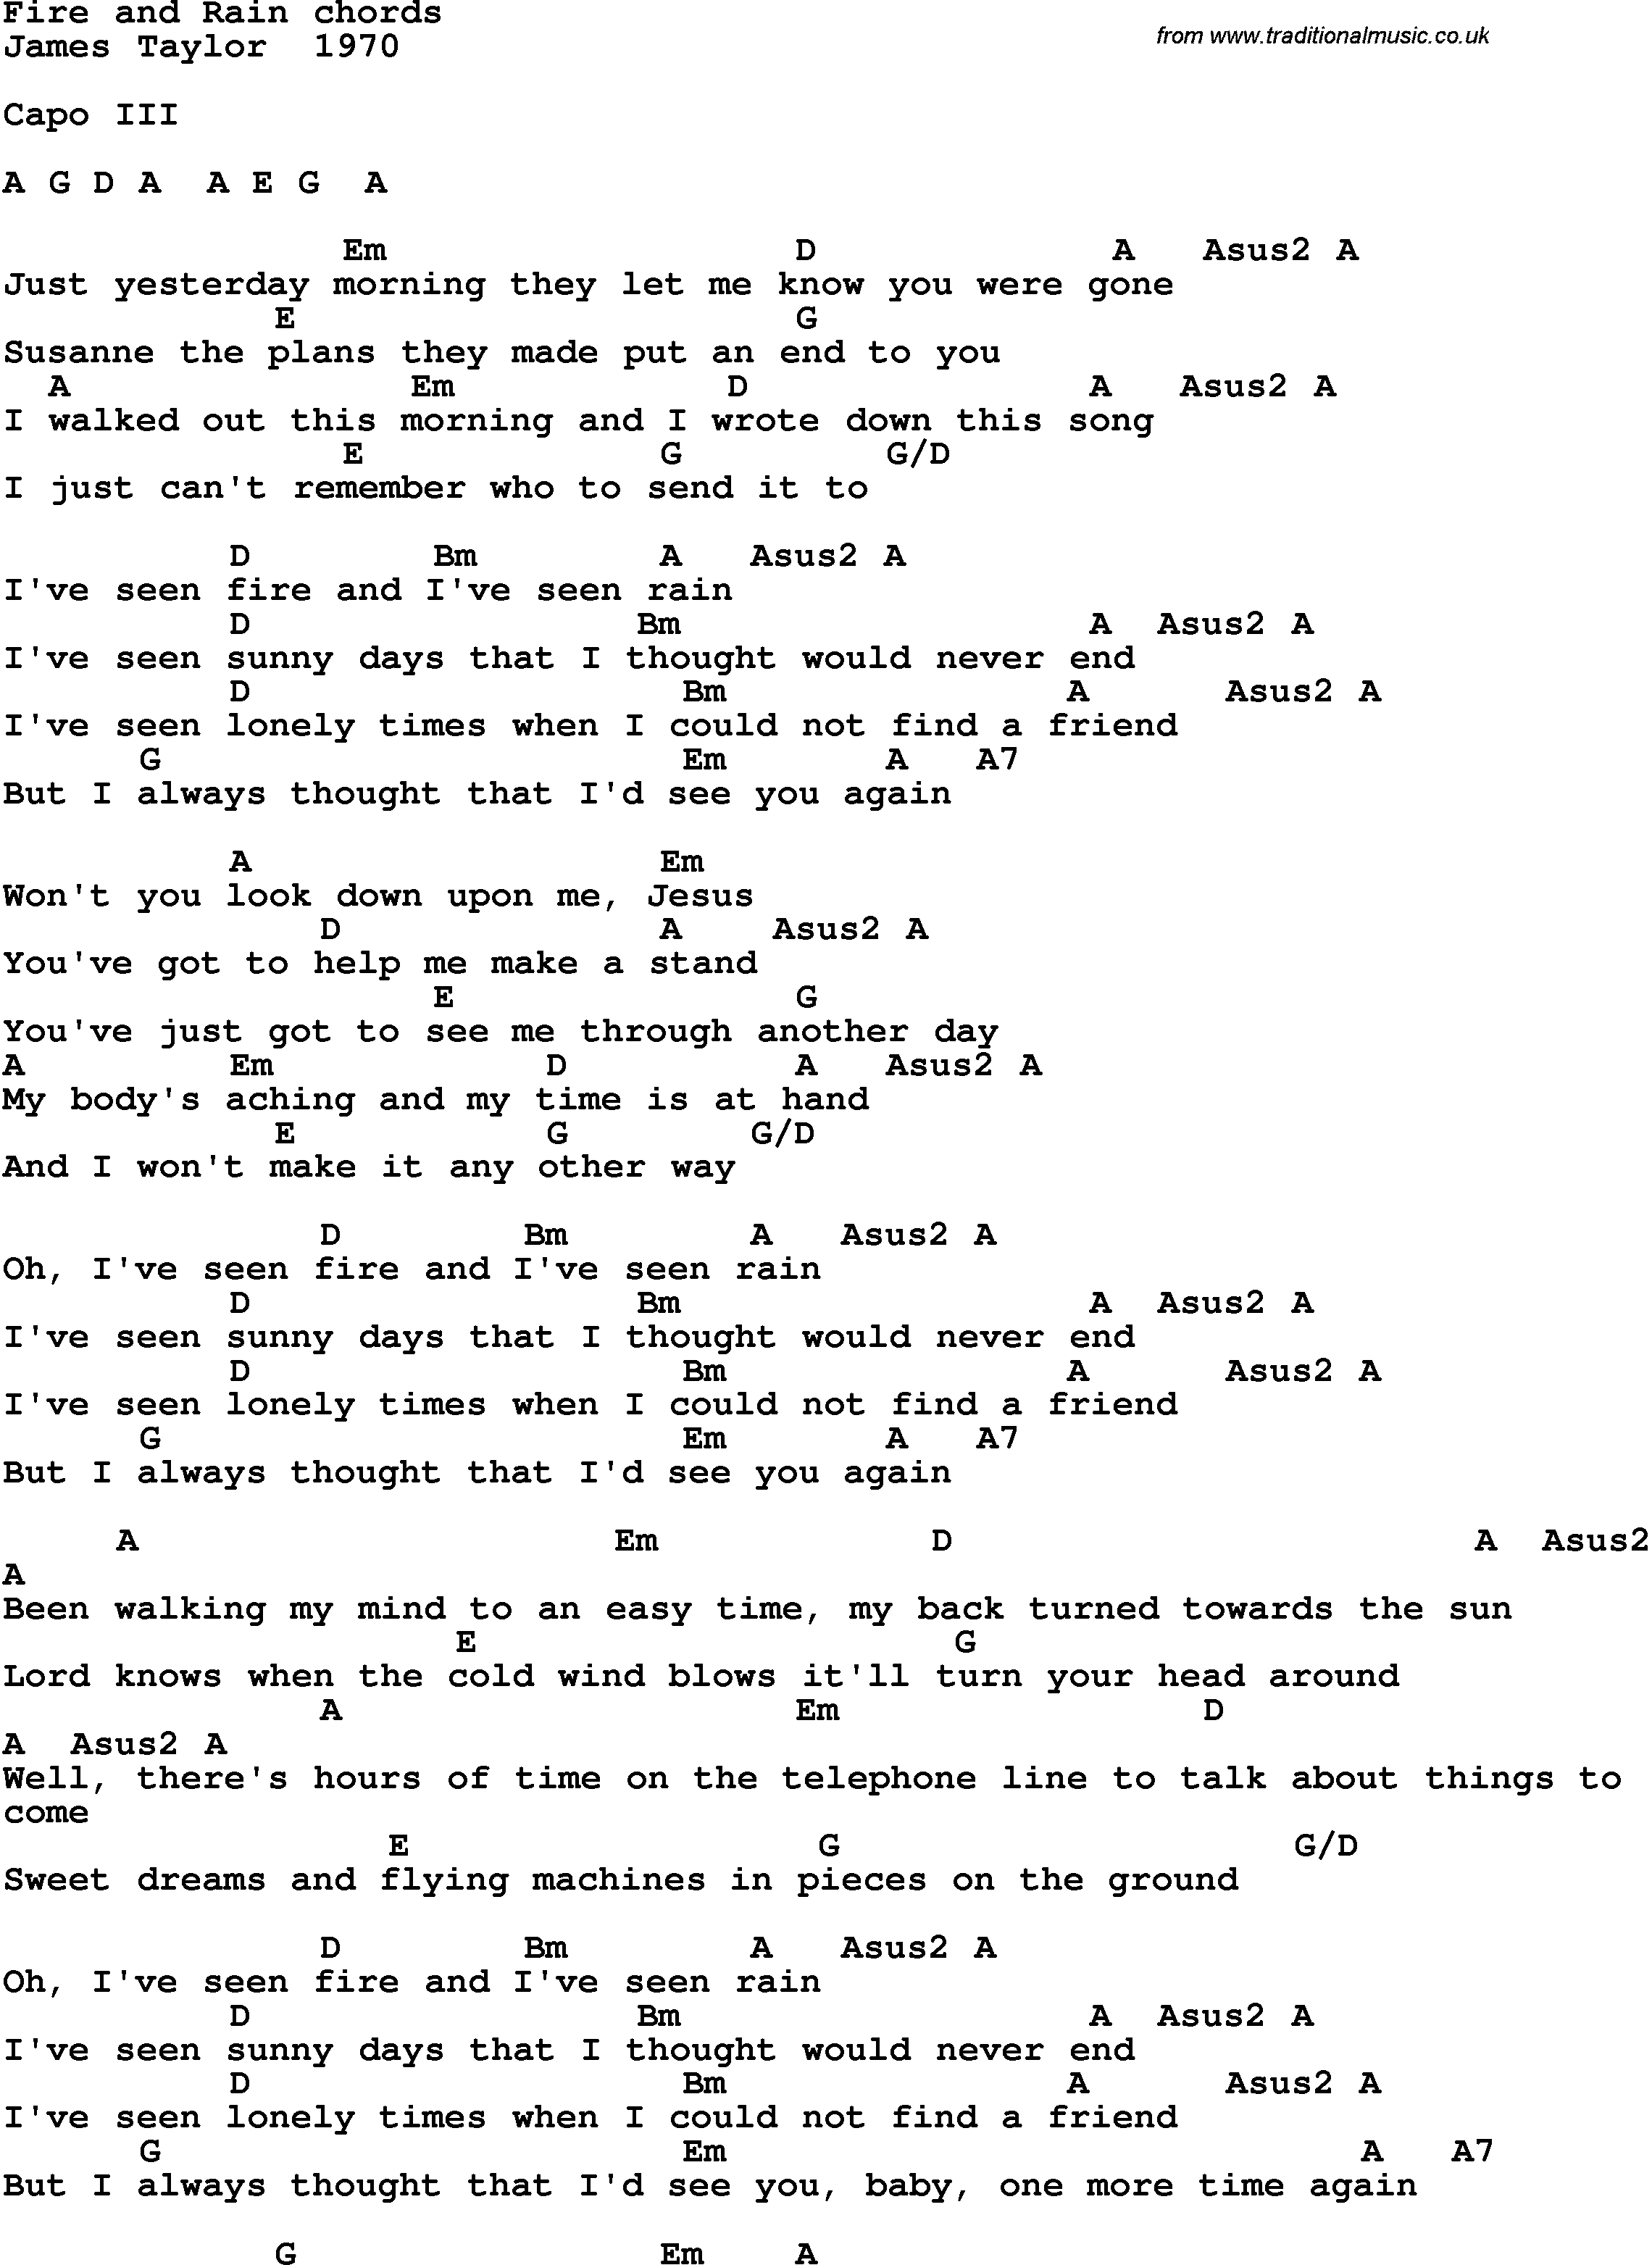 Song Lyrics with guitar chords for Fire And Rain